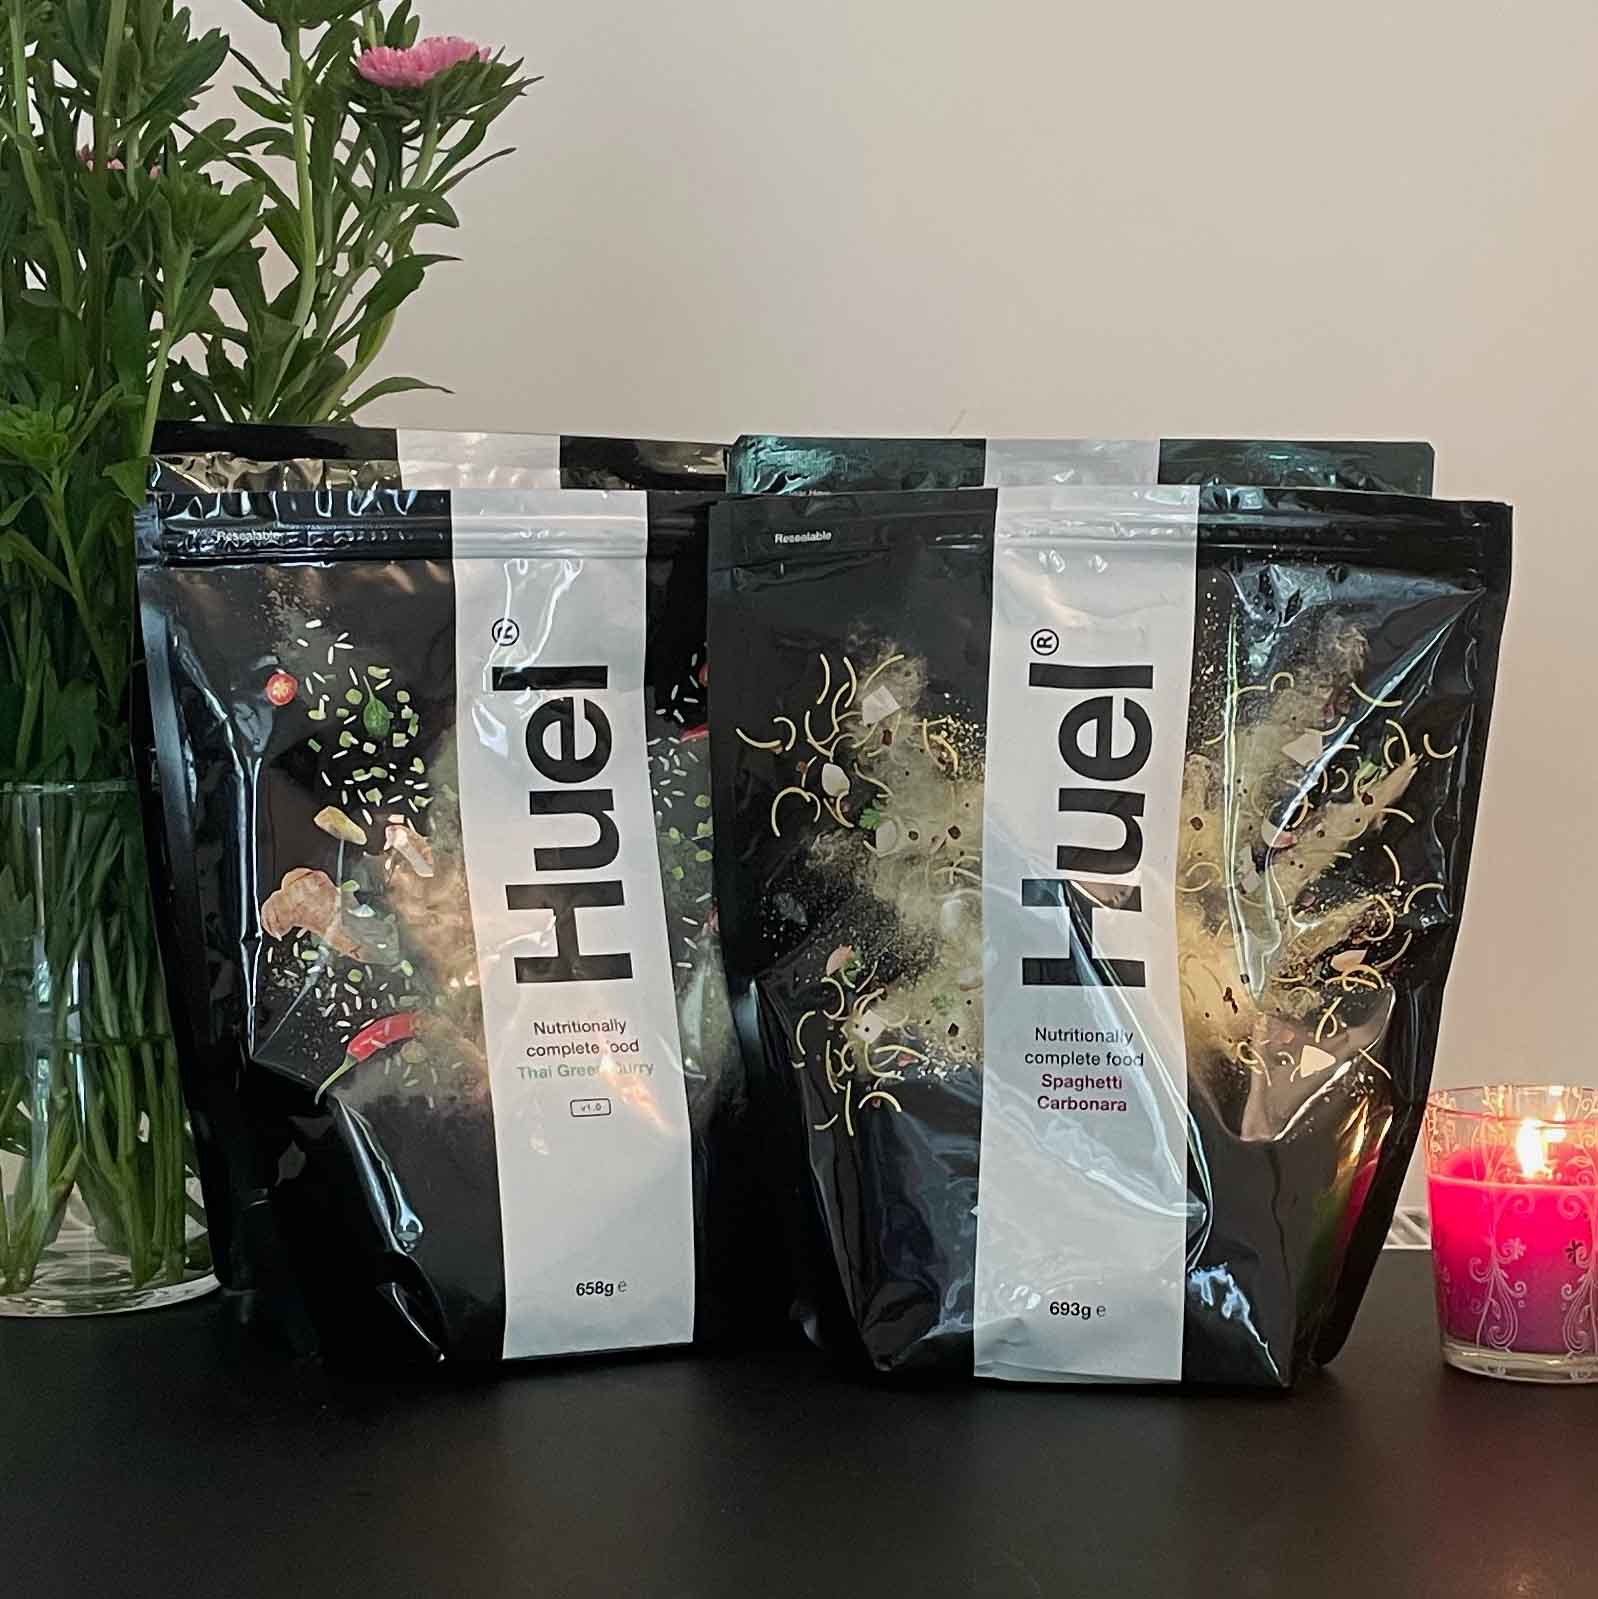 Huel now have hot and savoury meal replacement options